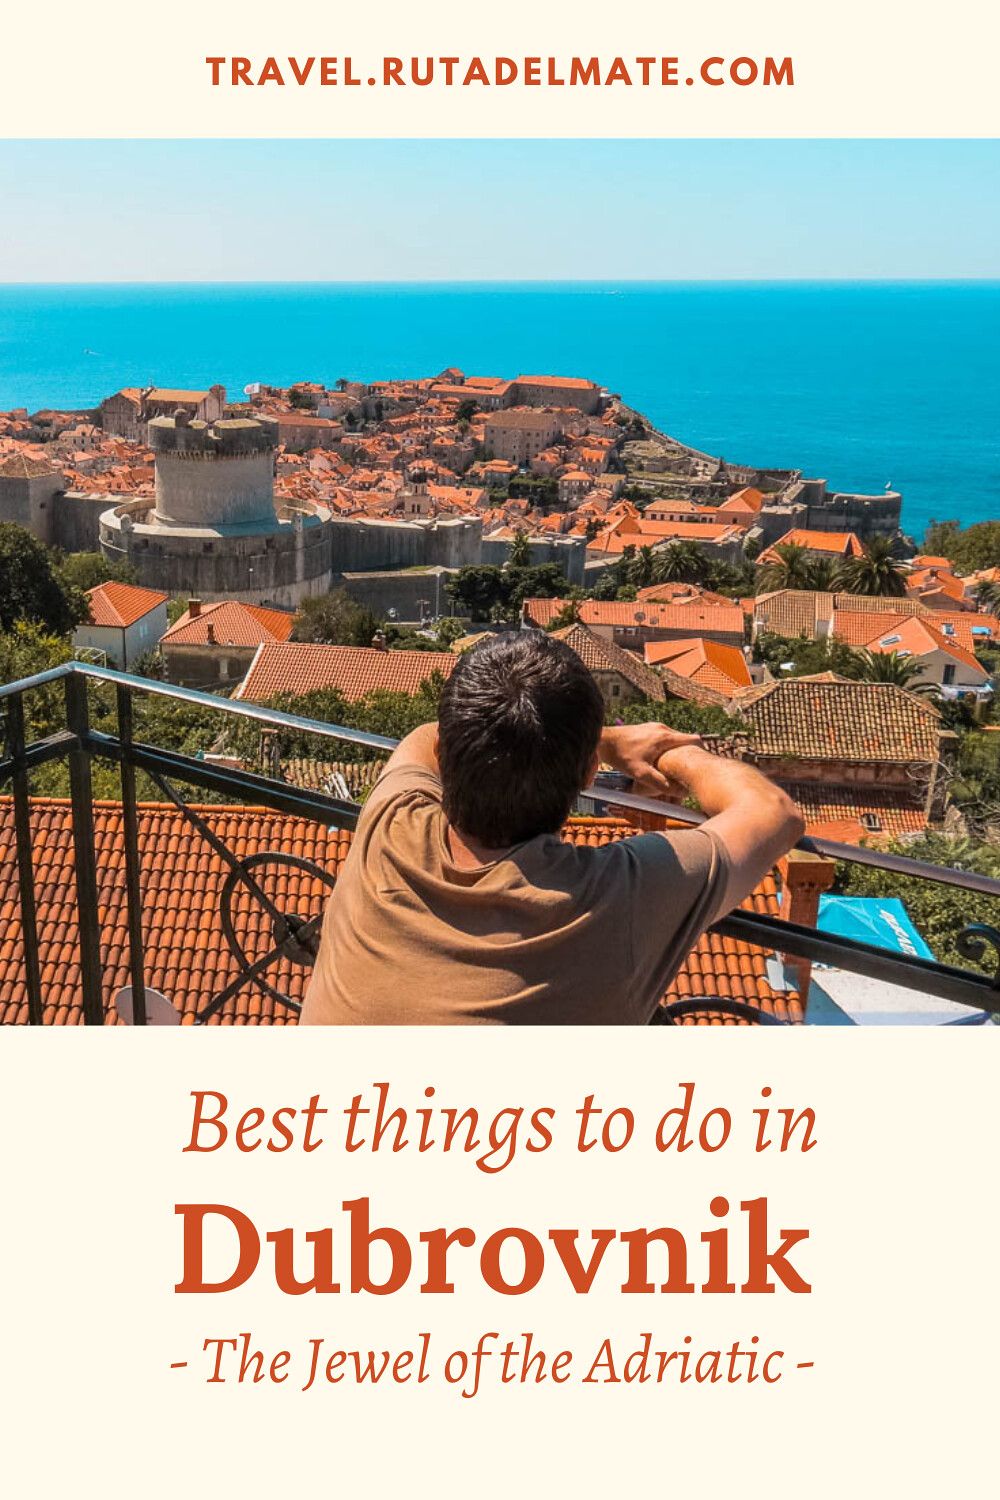 Things to do in Dubrovnik in 1 day